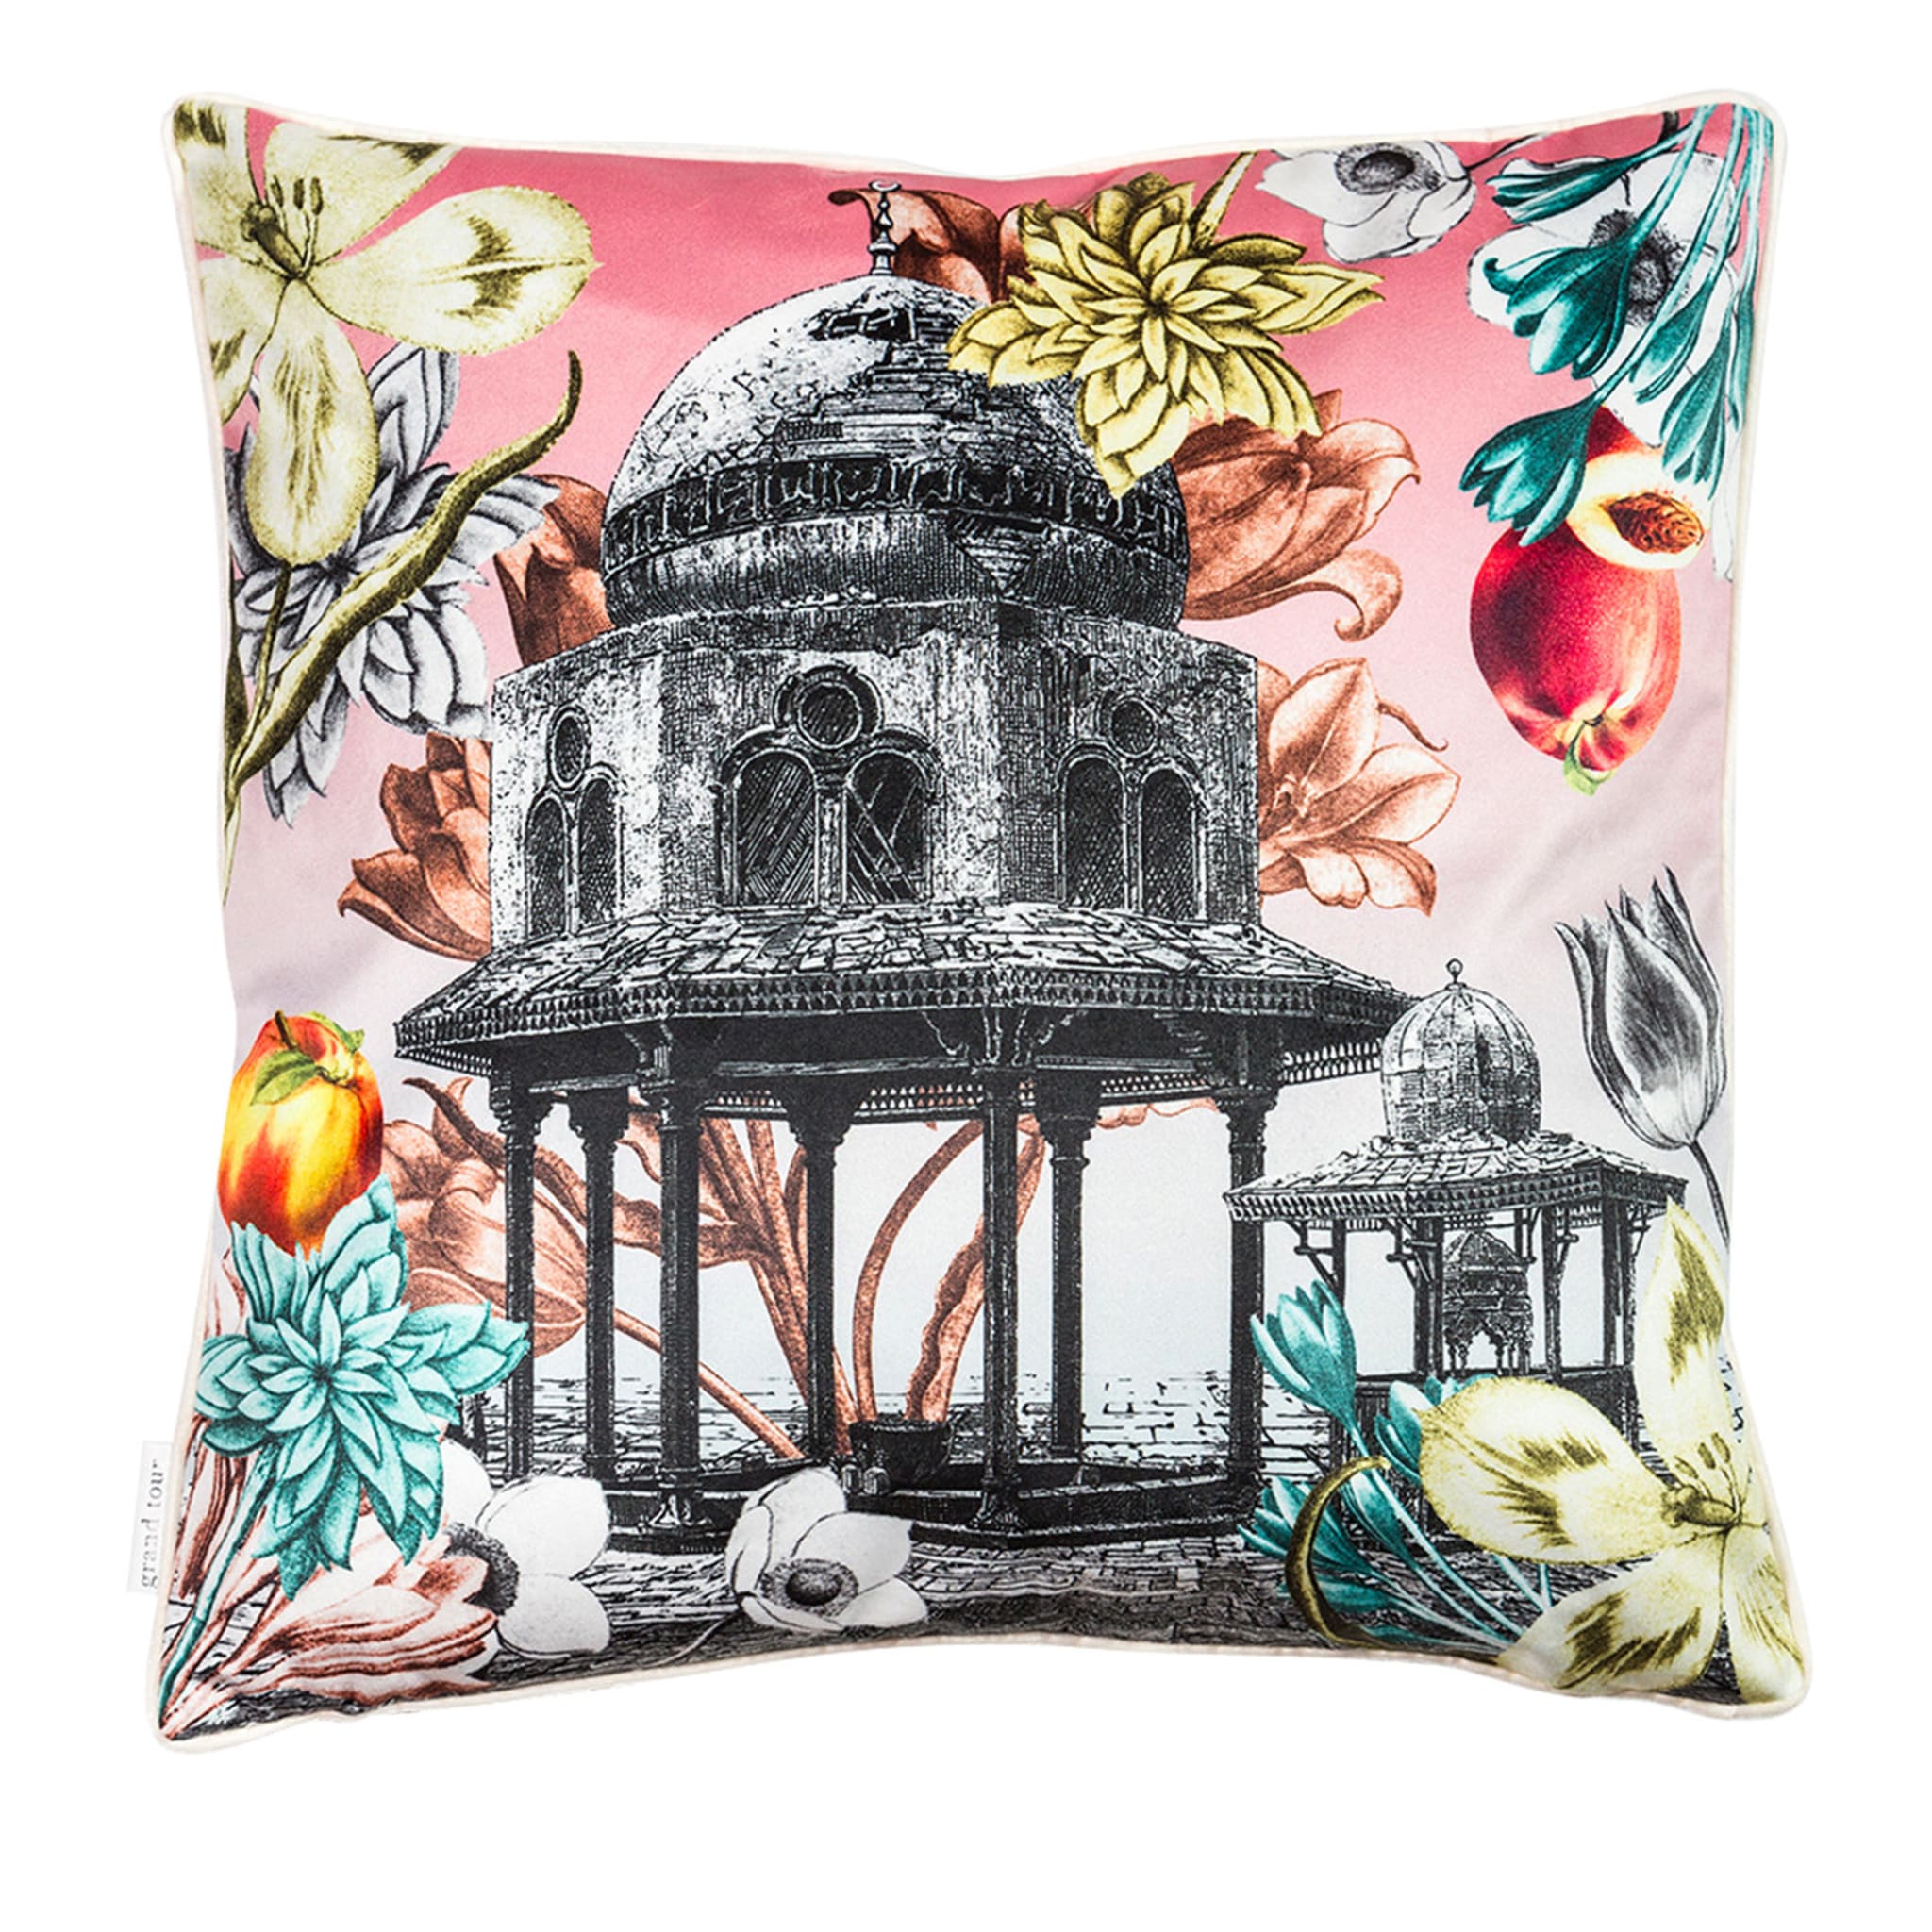 Cairo Velvet Cushion With Landscape And Flowers #4 - Main view